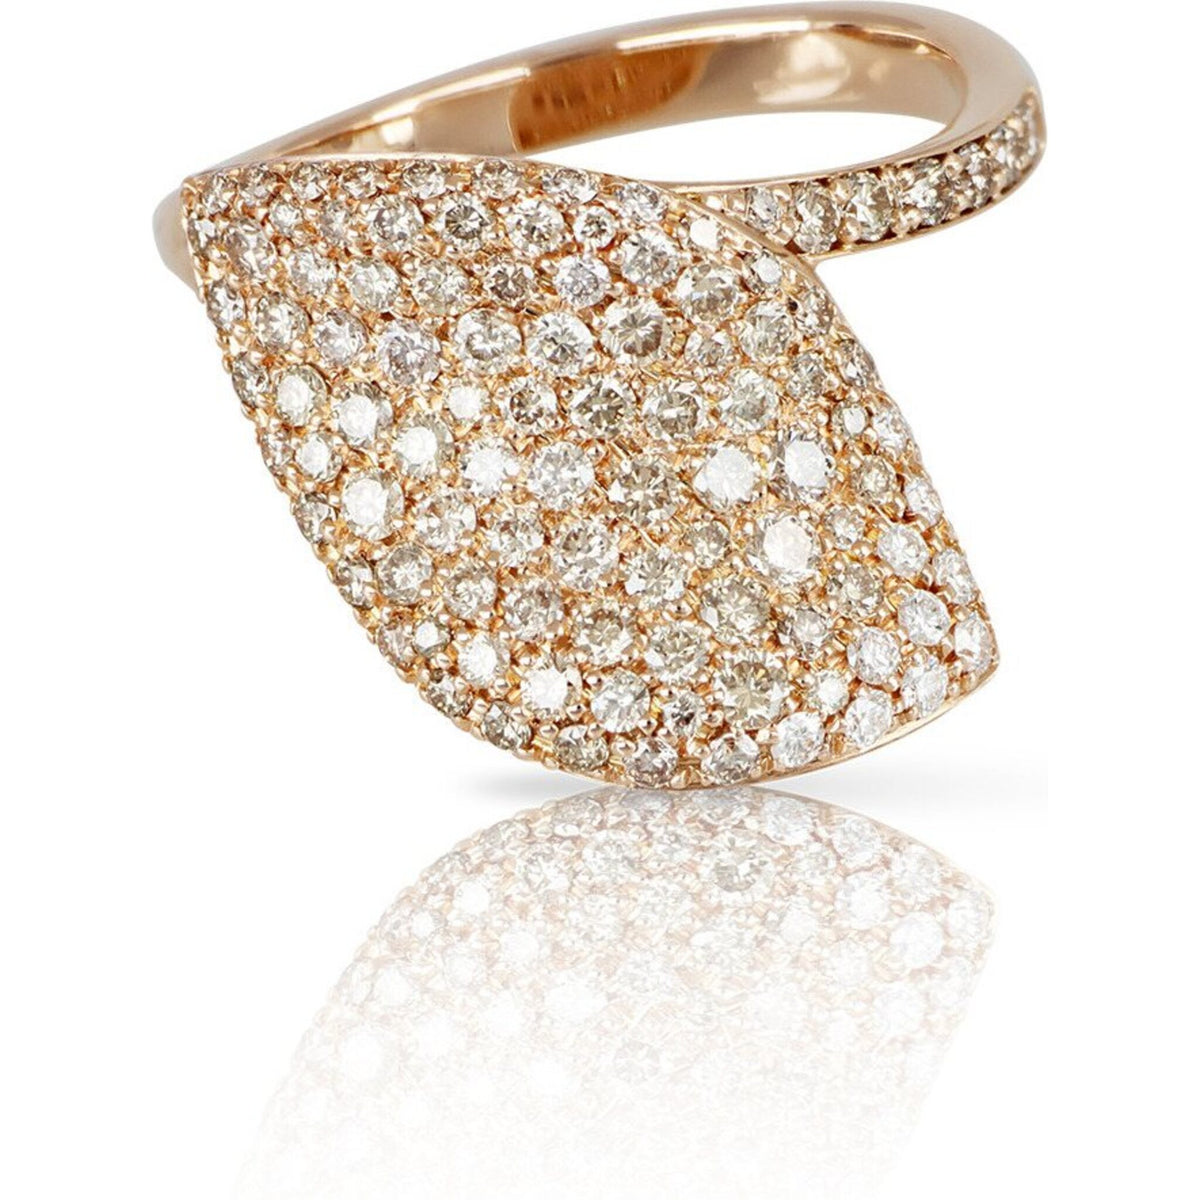 Pasquale Bruni - Aleluiá Ring in 18k Rose Gold with White and Champagne Diamonds